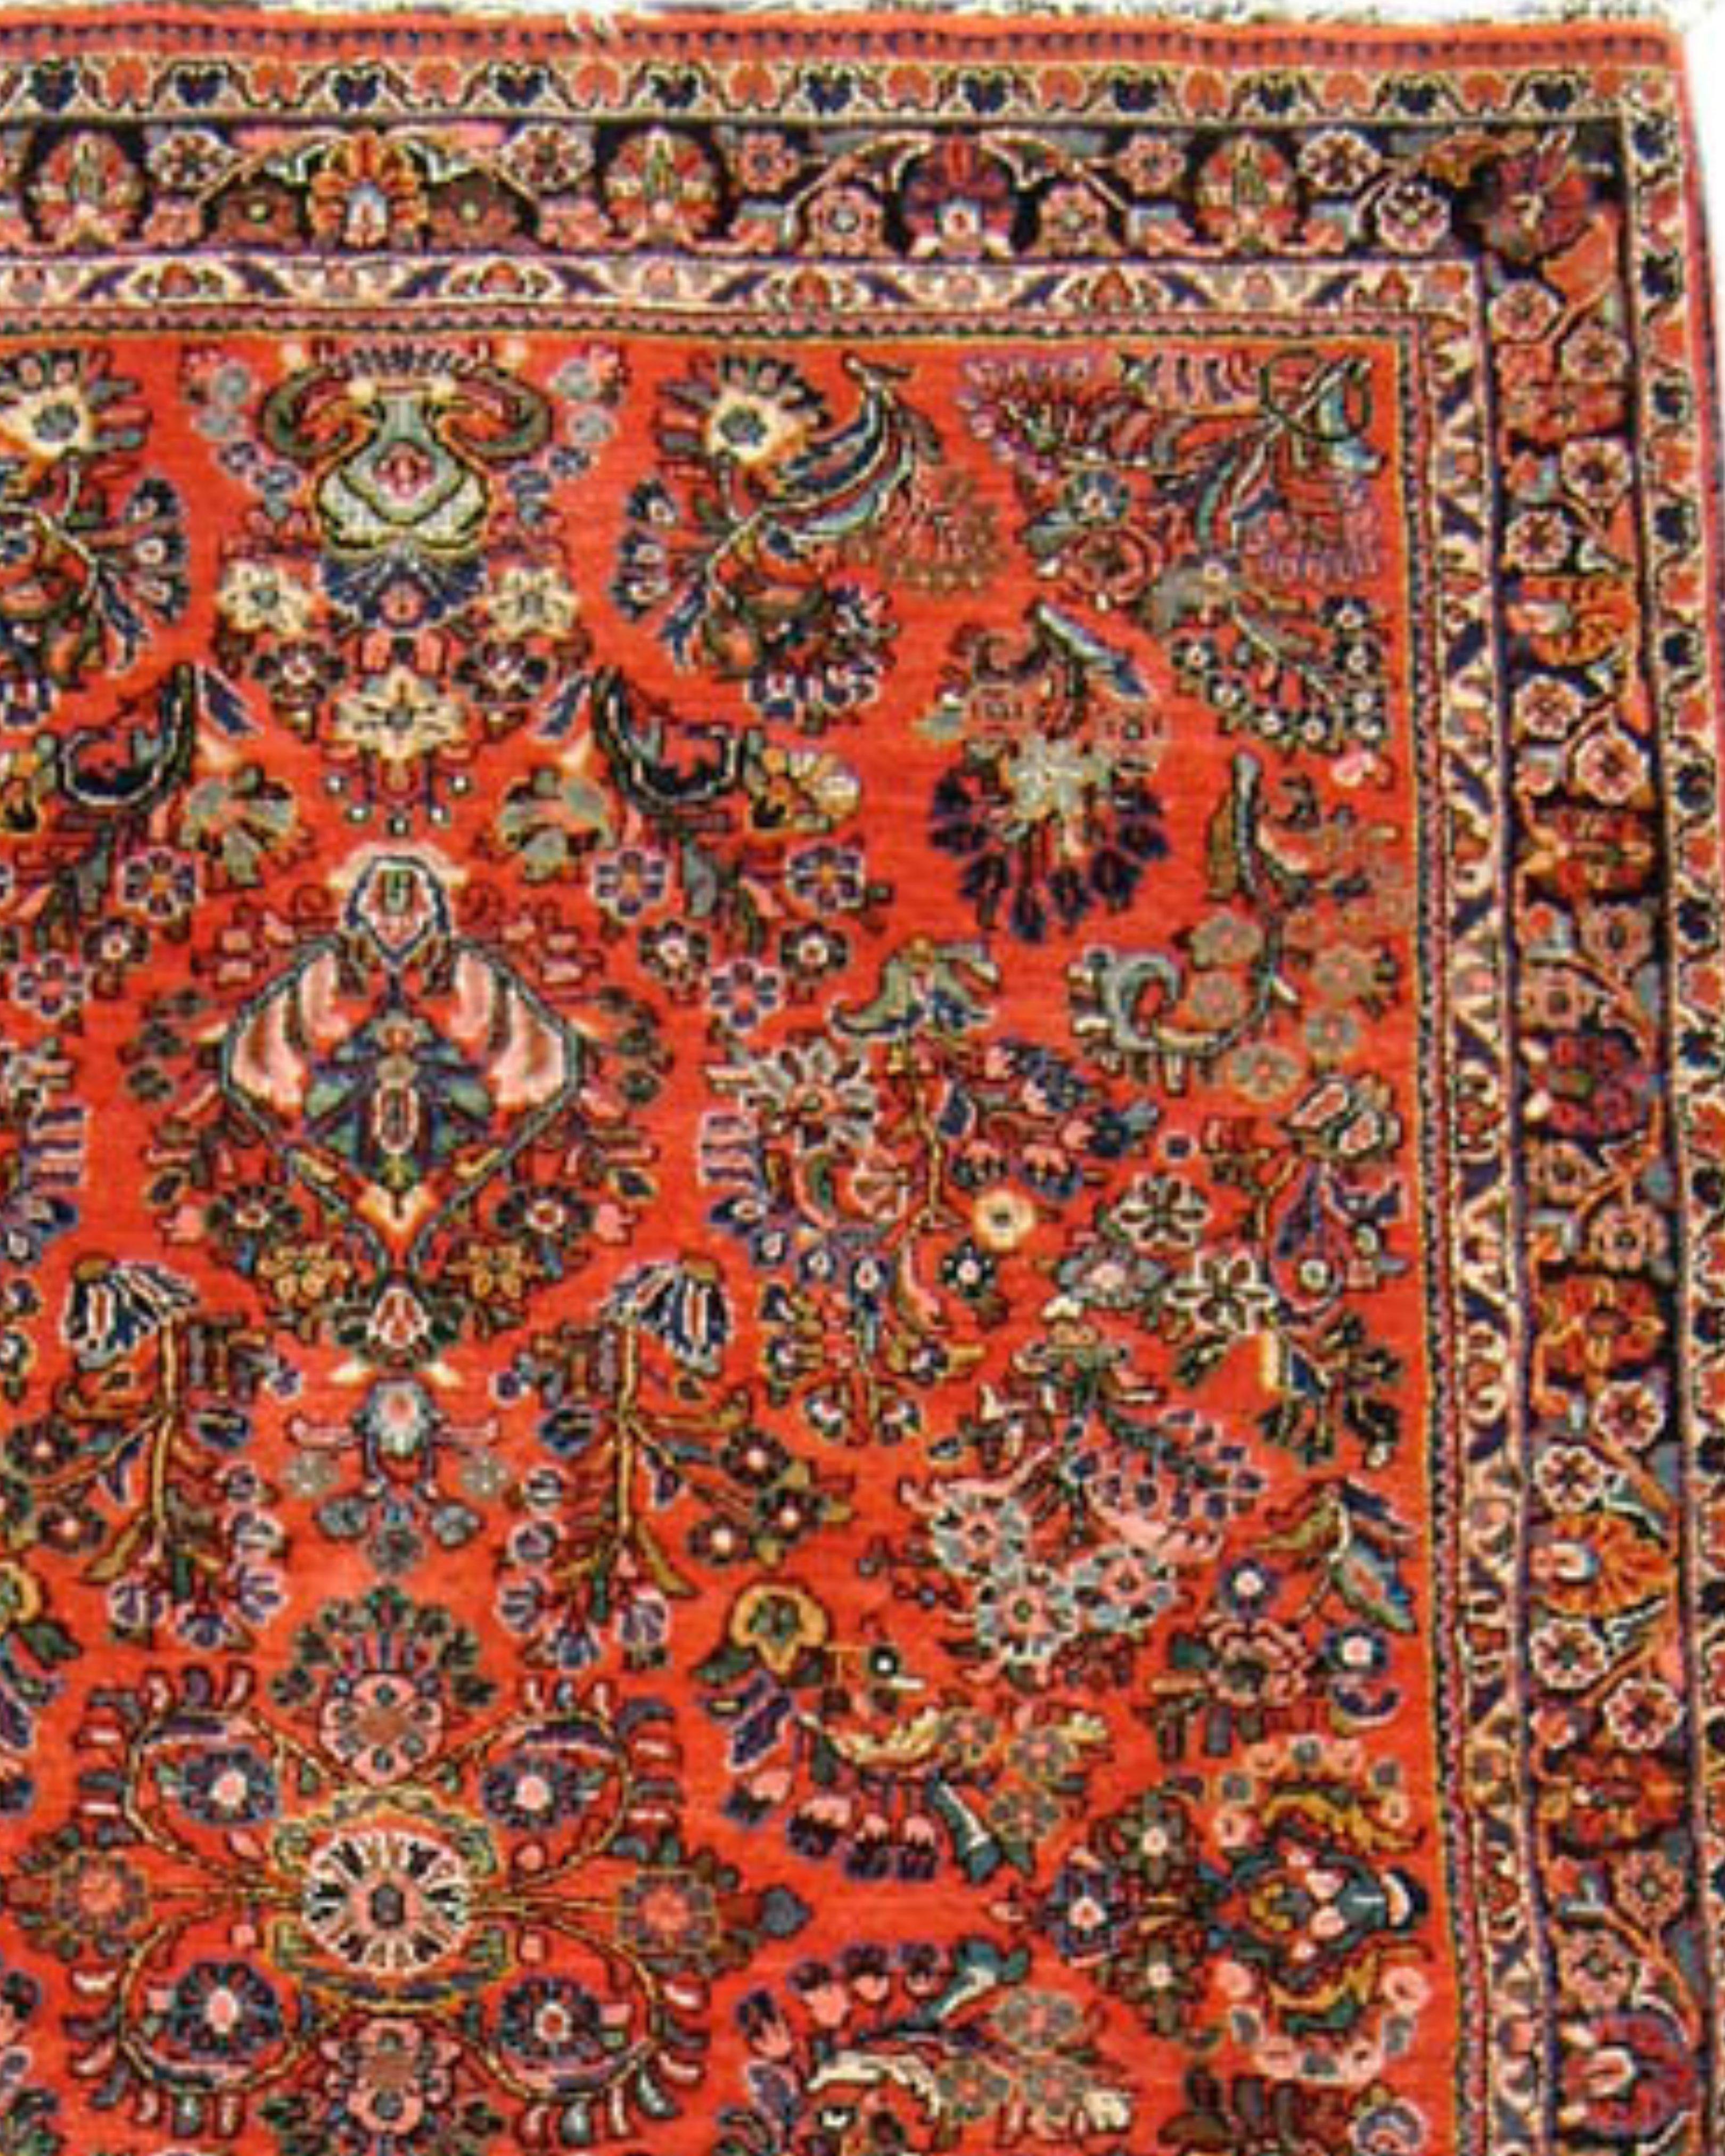 Vintage Persian Sarouk Rug, Mid-20th Century

Additional Information:
Dimensions: 6'7